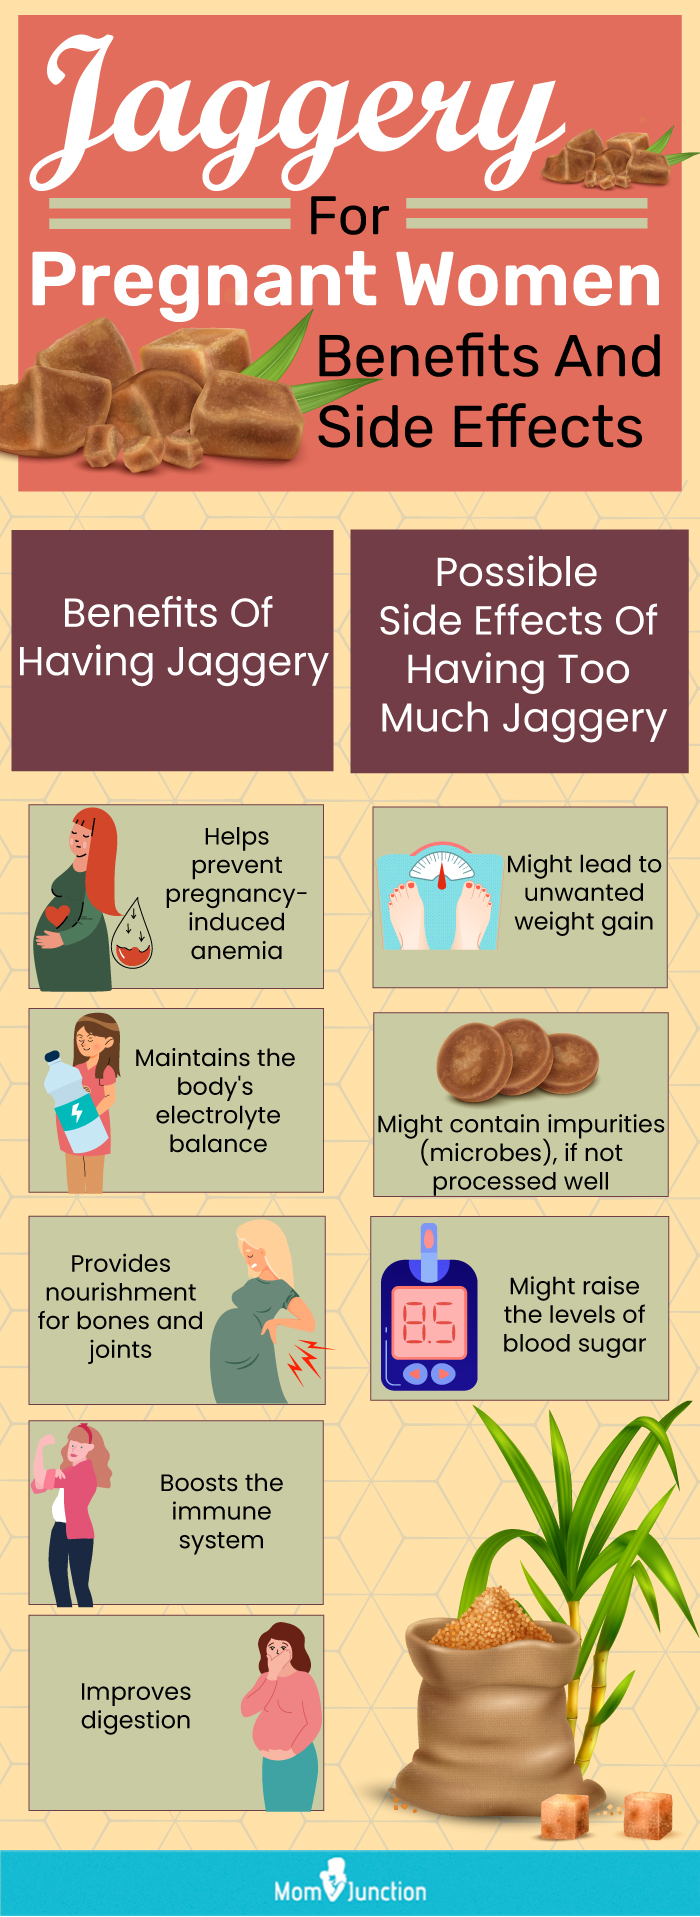 benefits and side effects of including jaggery during pregnancy [infographic]